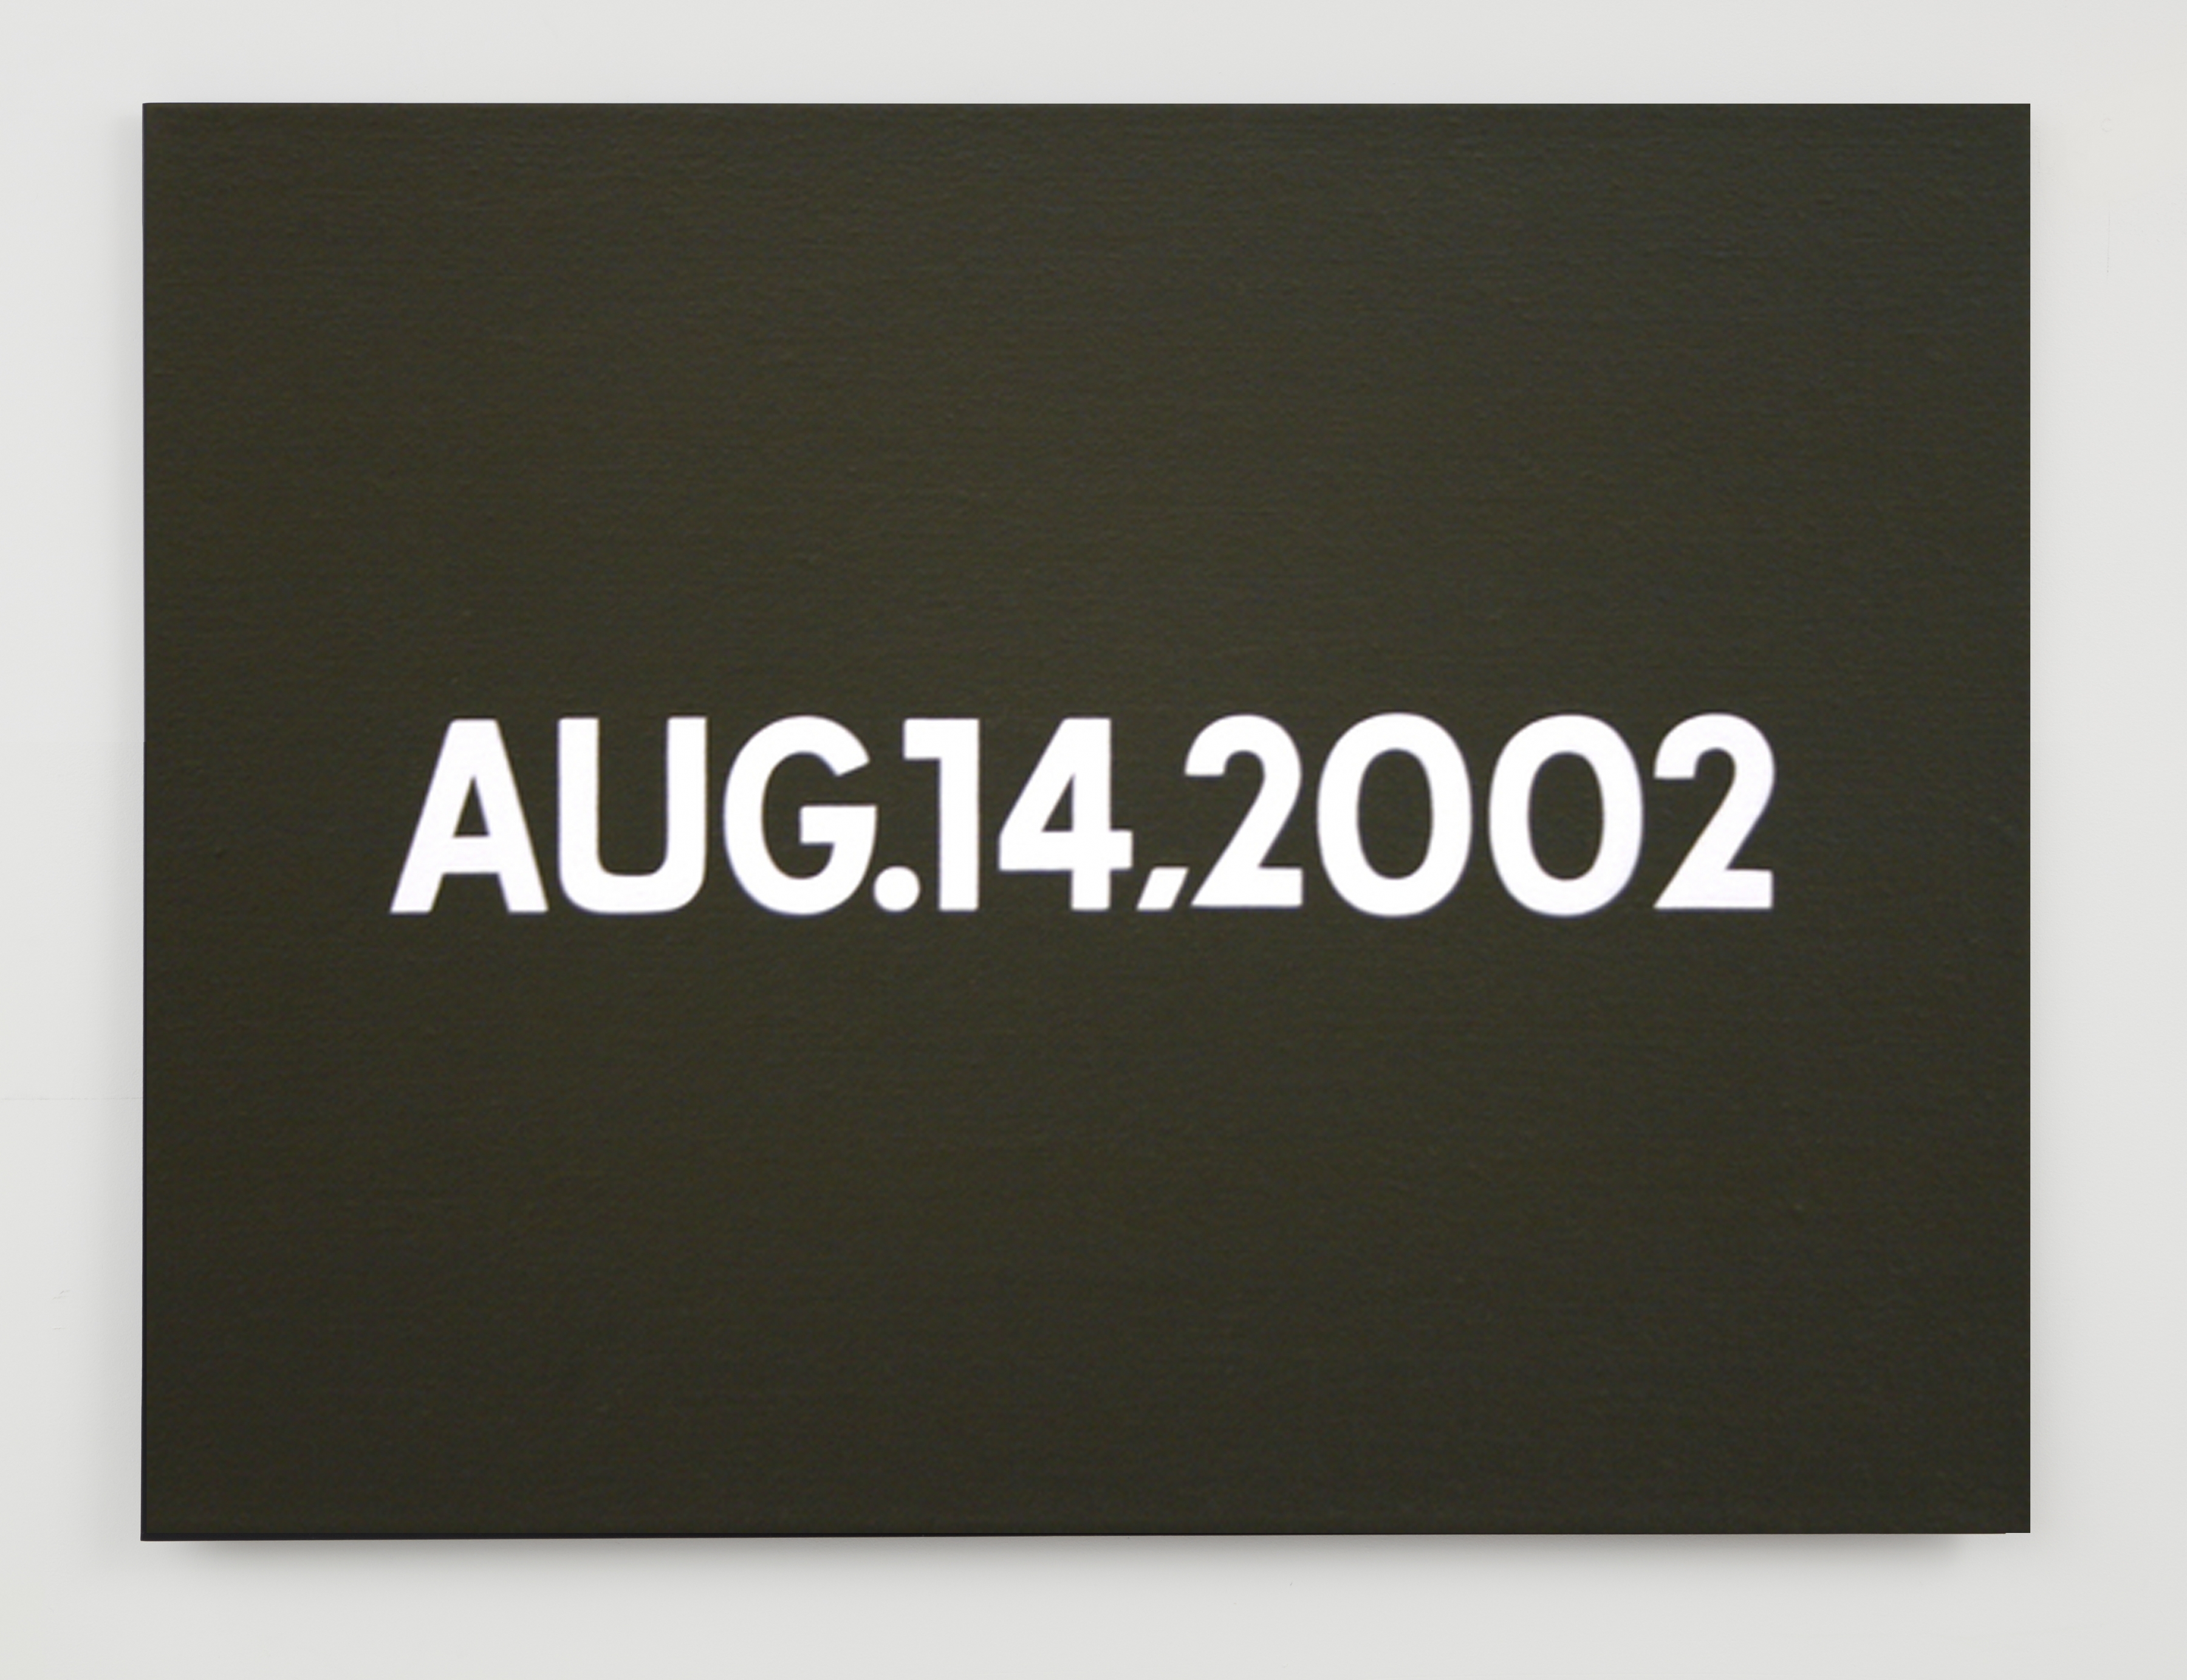 On Kawara
AUG. 14, 2002,&nbsp;2002
from &quot;Today&quot; series, 1966-2013&nbsp;
acrylic on canvas
8 x 10 1/2 in. (20.3 x 26.7 cm)

The collection of Paul Marks